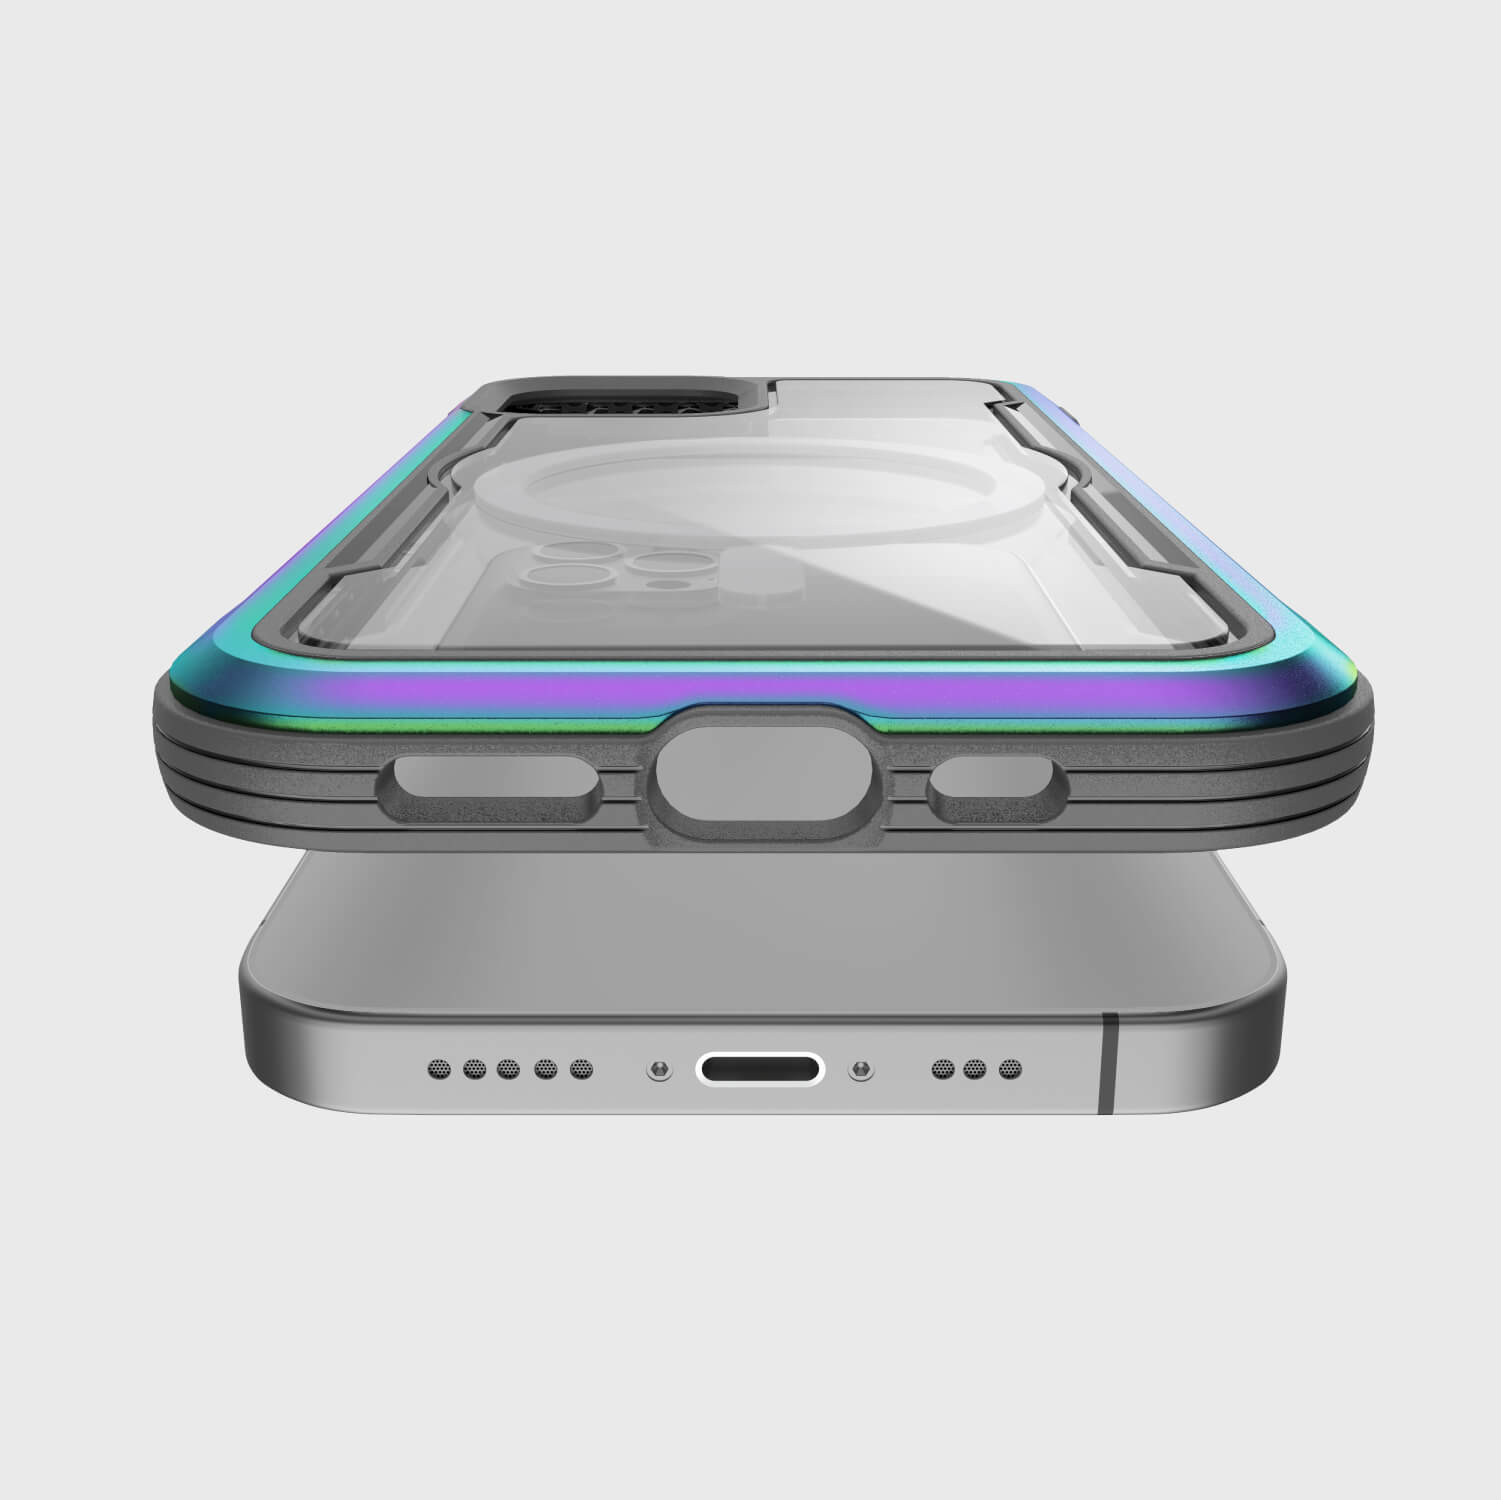 A Raptic SHIELD PRO MAGNET iPhone 12 Pro Max case with a rainbow colored back, compatible with MagSafe chargers.